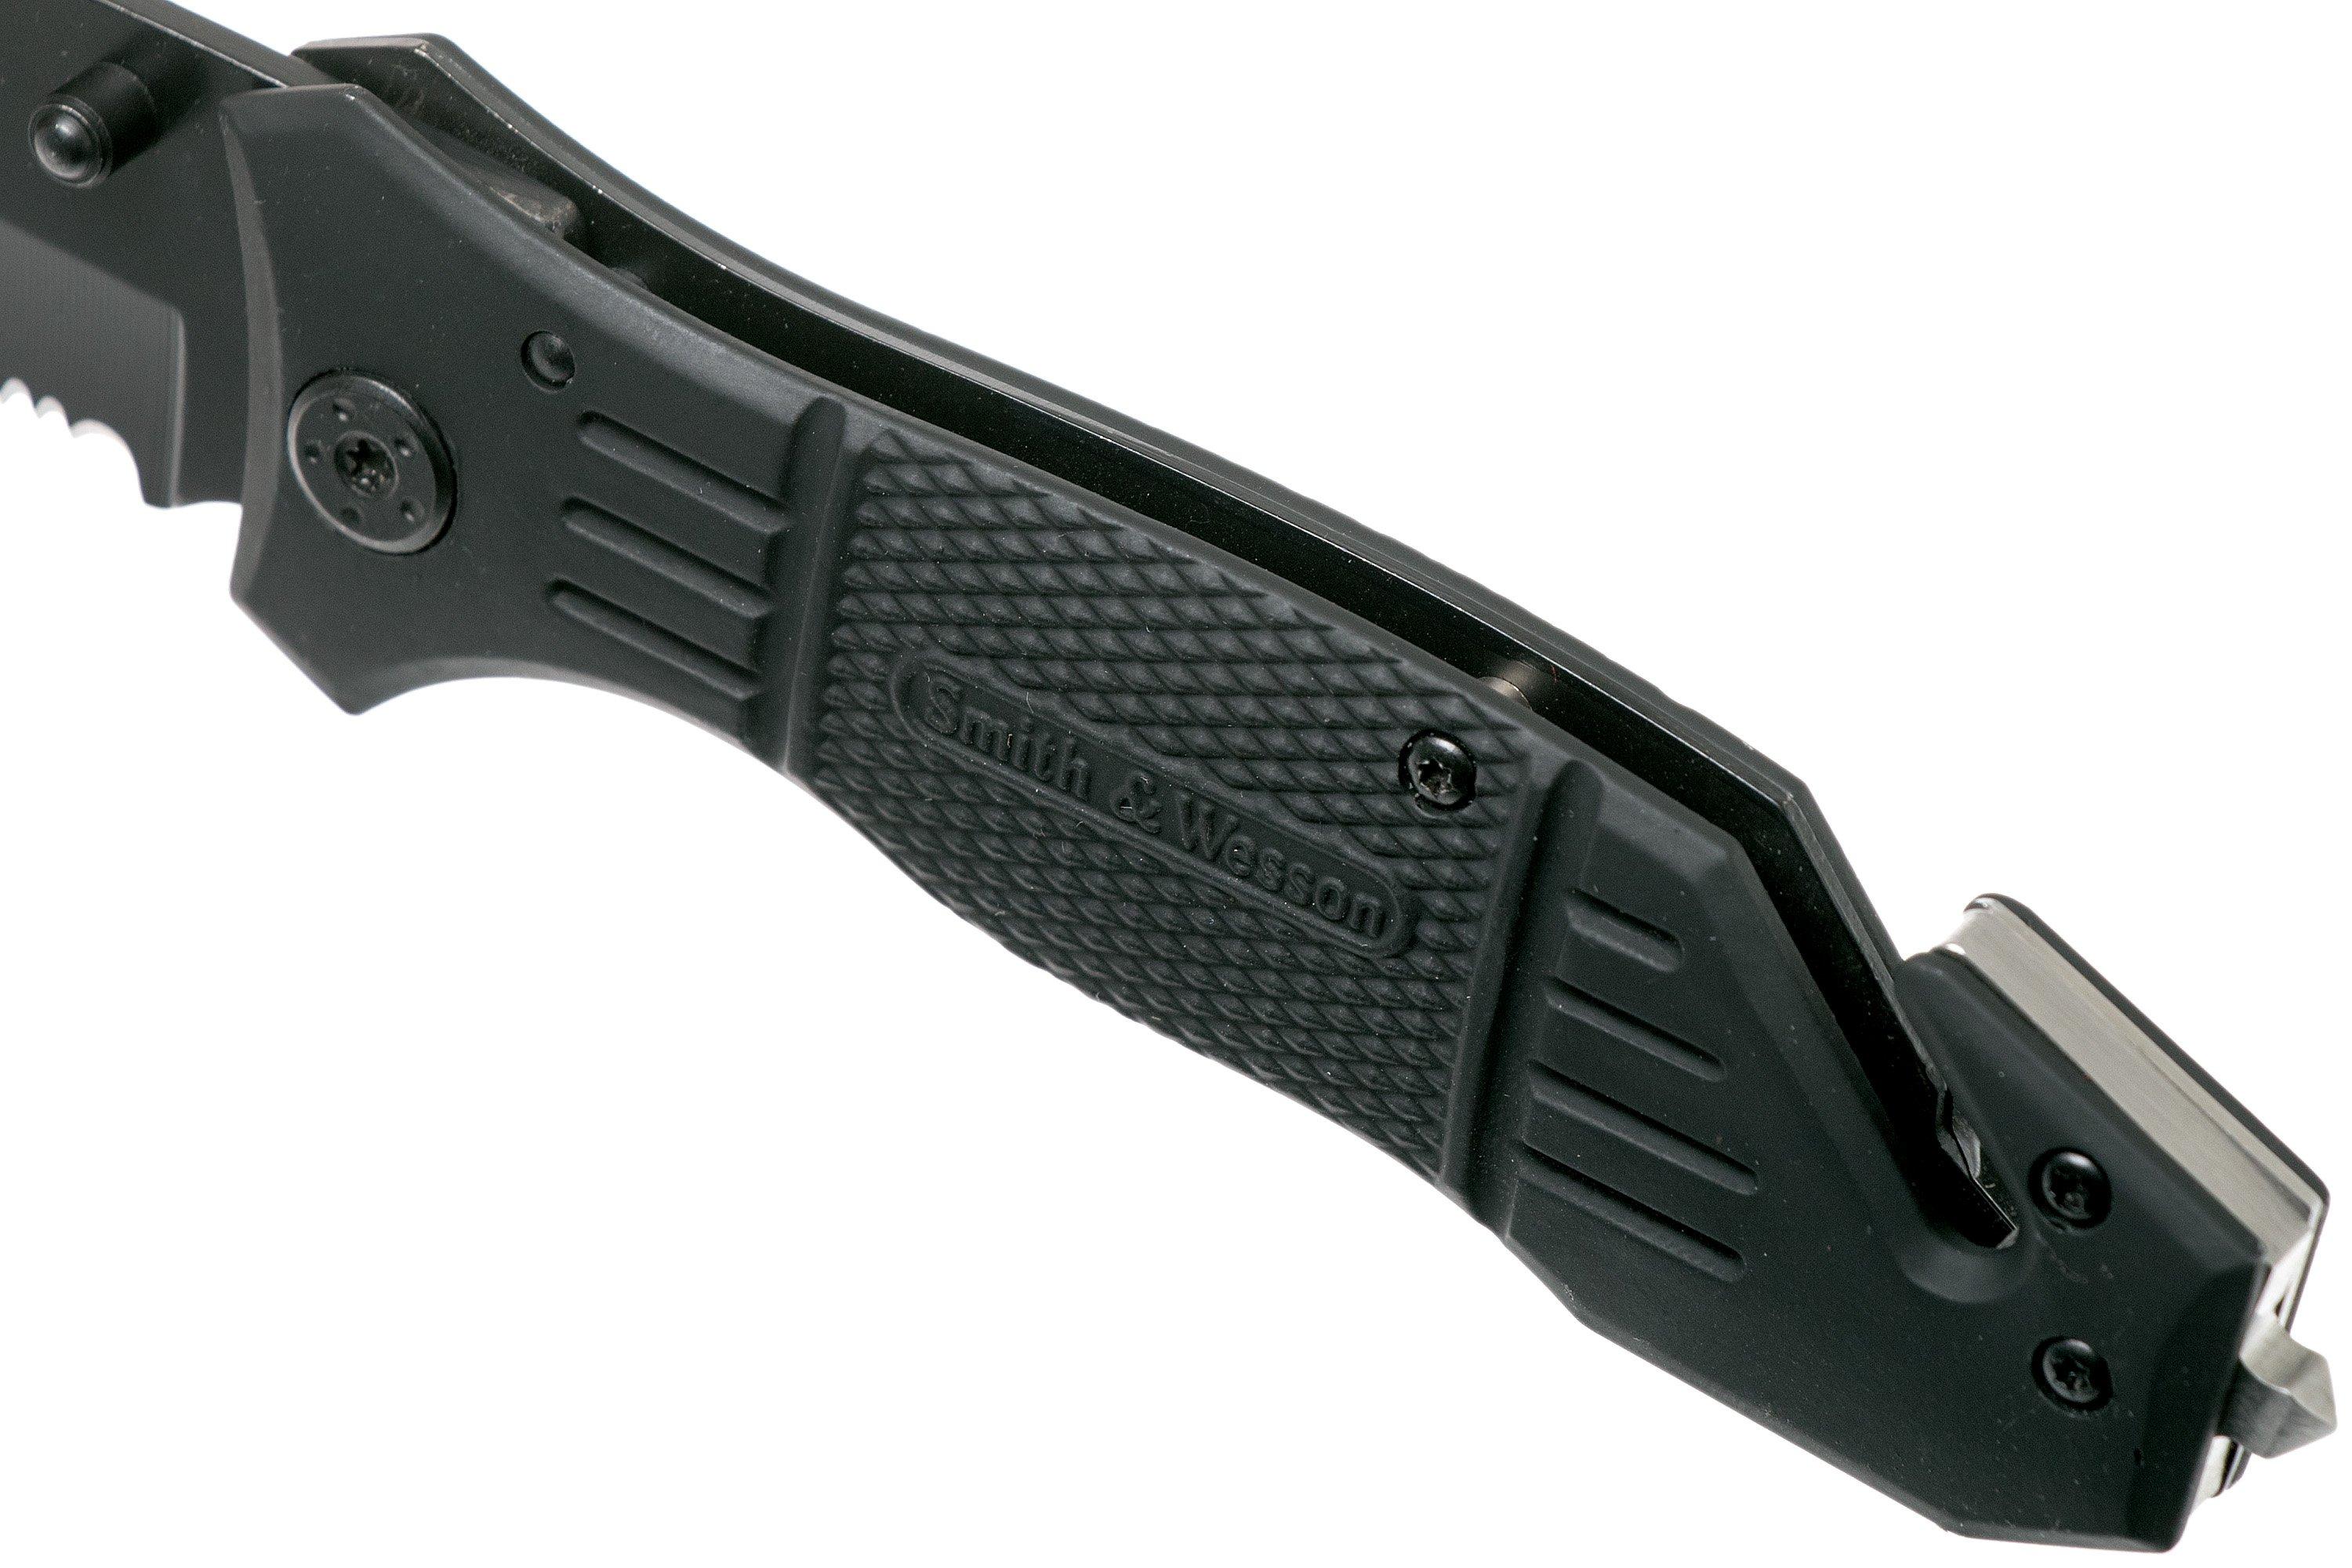 dinosaurus ego skyde Smith & Wesson Extreme Ops SWFR2S black, rescue knife | Advantageously  shopping at Knivesandtools.com